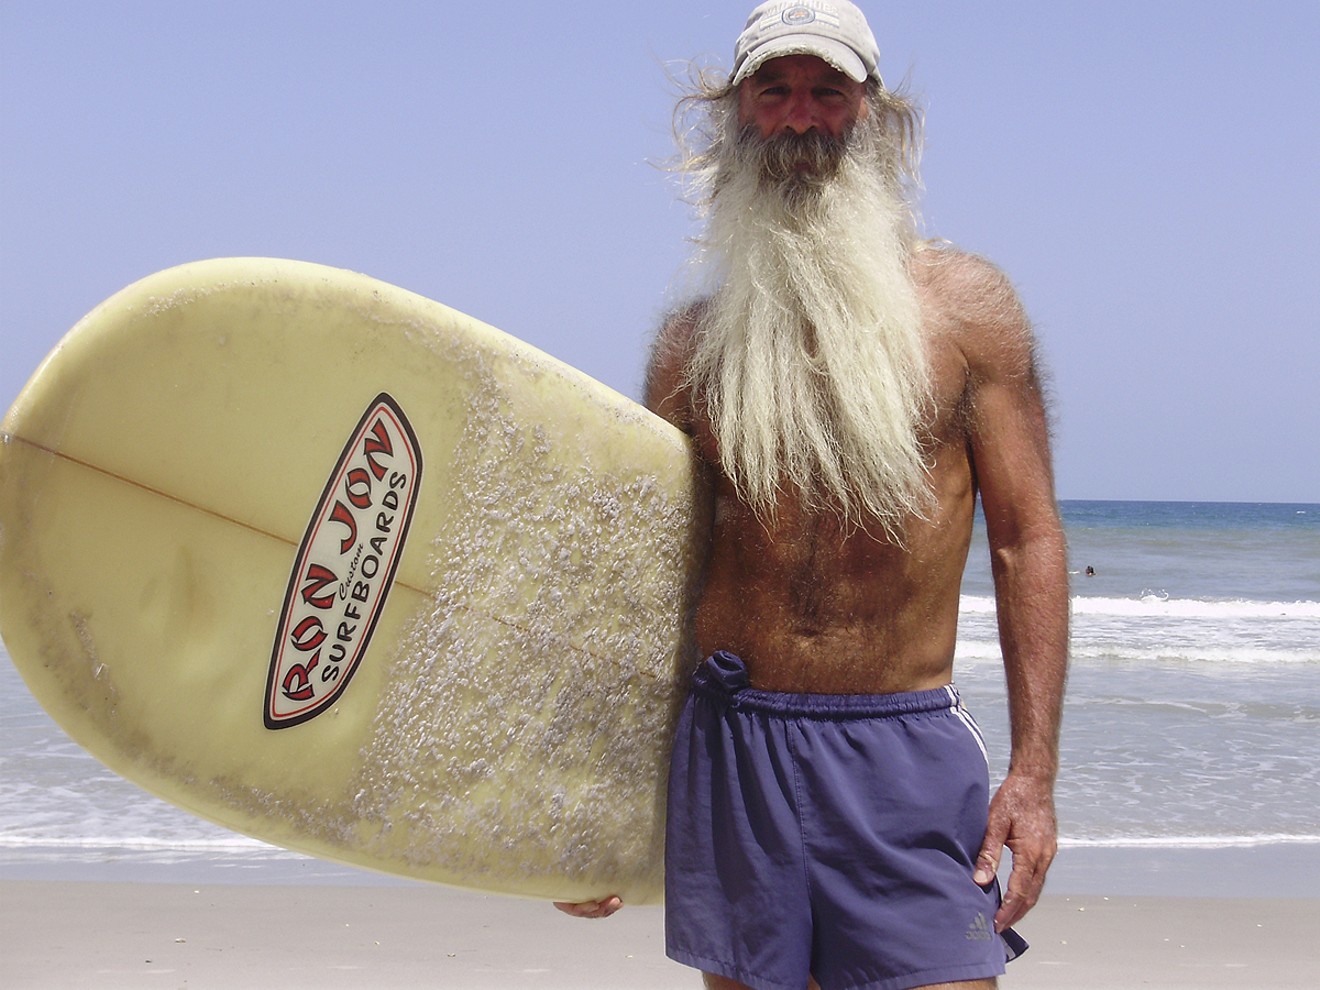 If there's an ocean, maybe there's surf': Bruce Brown on making